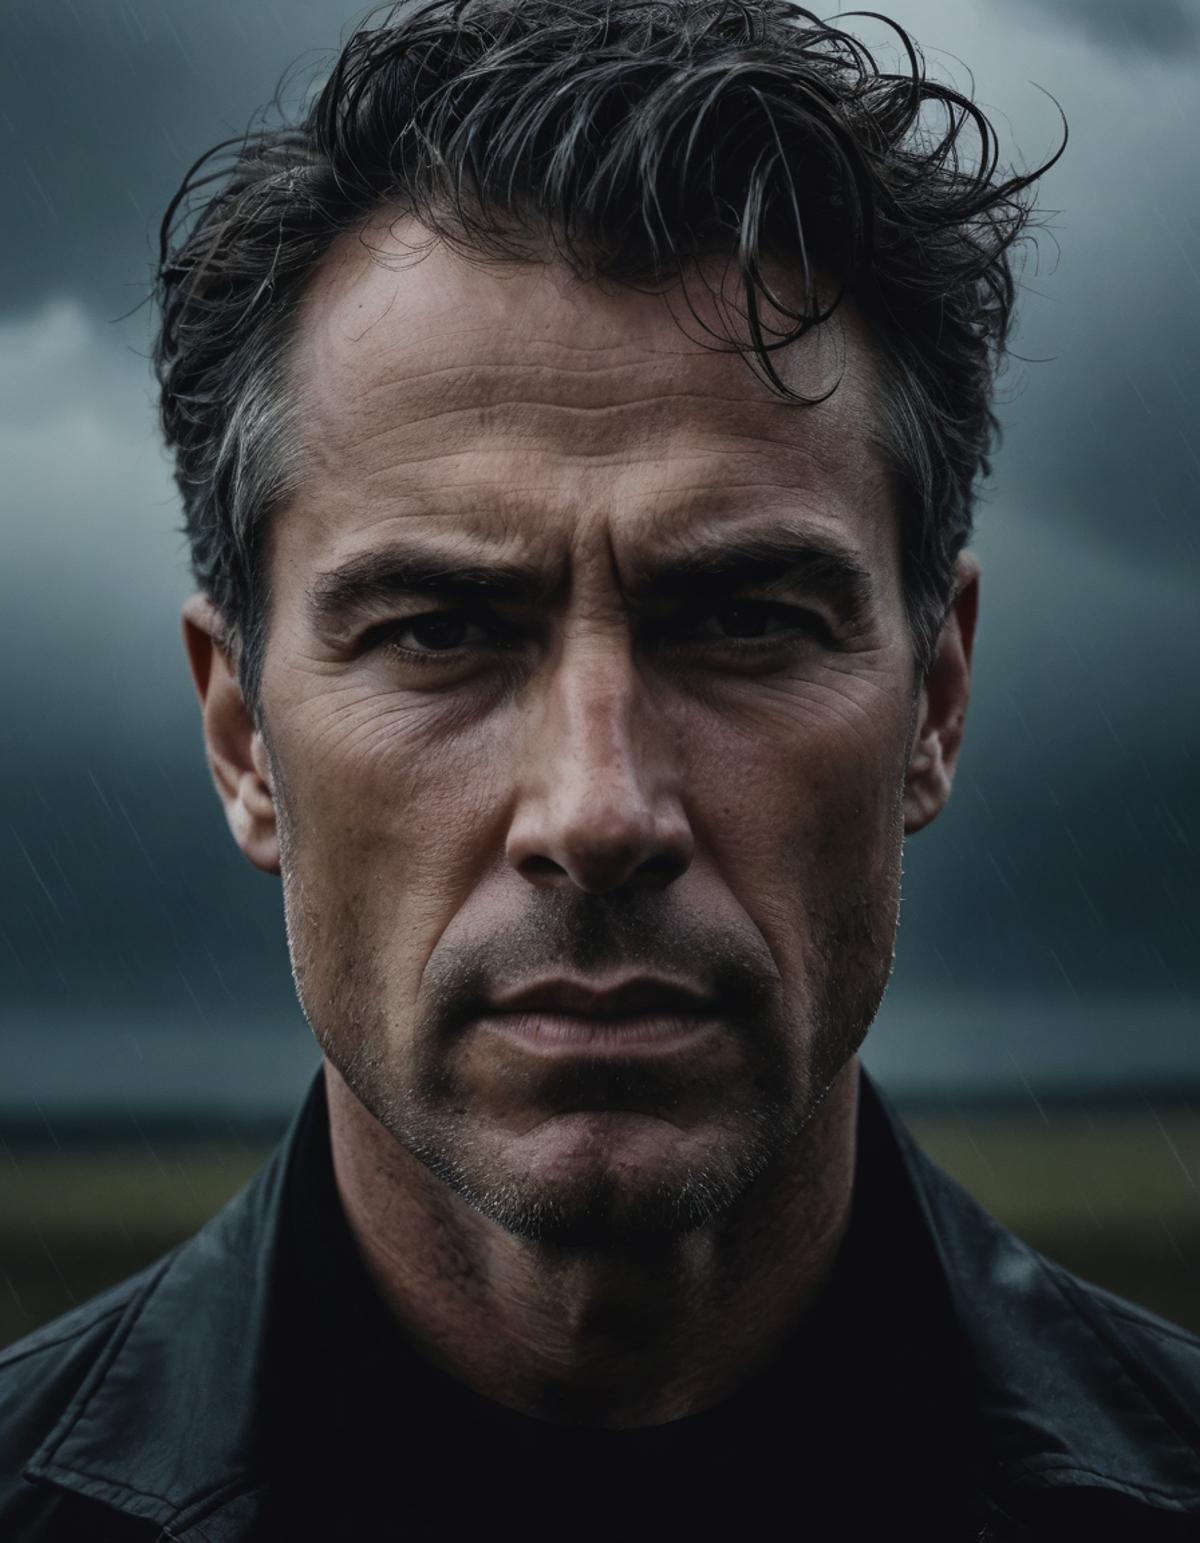 A man with a serious expression, wet hair, and a black leather jacket.